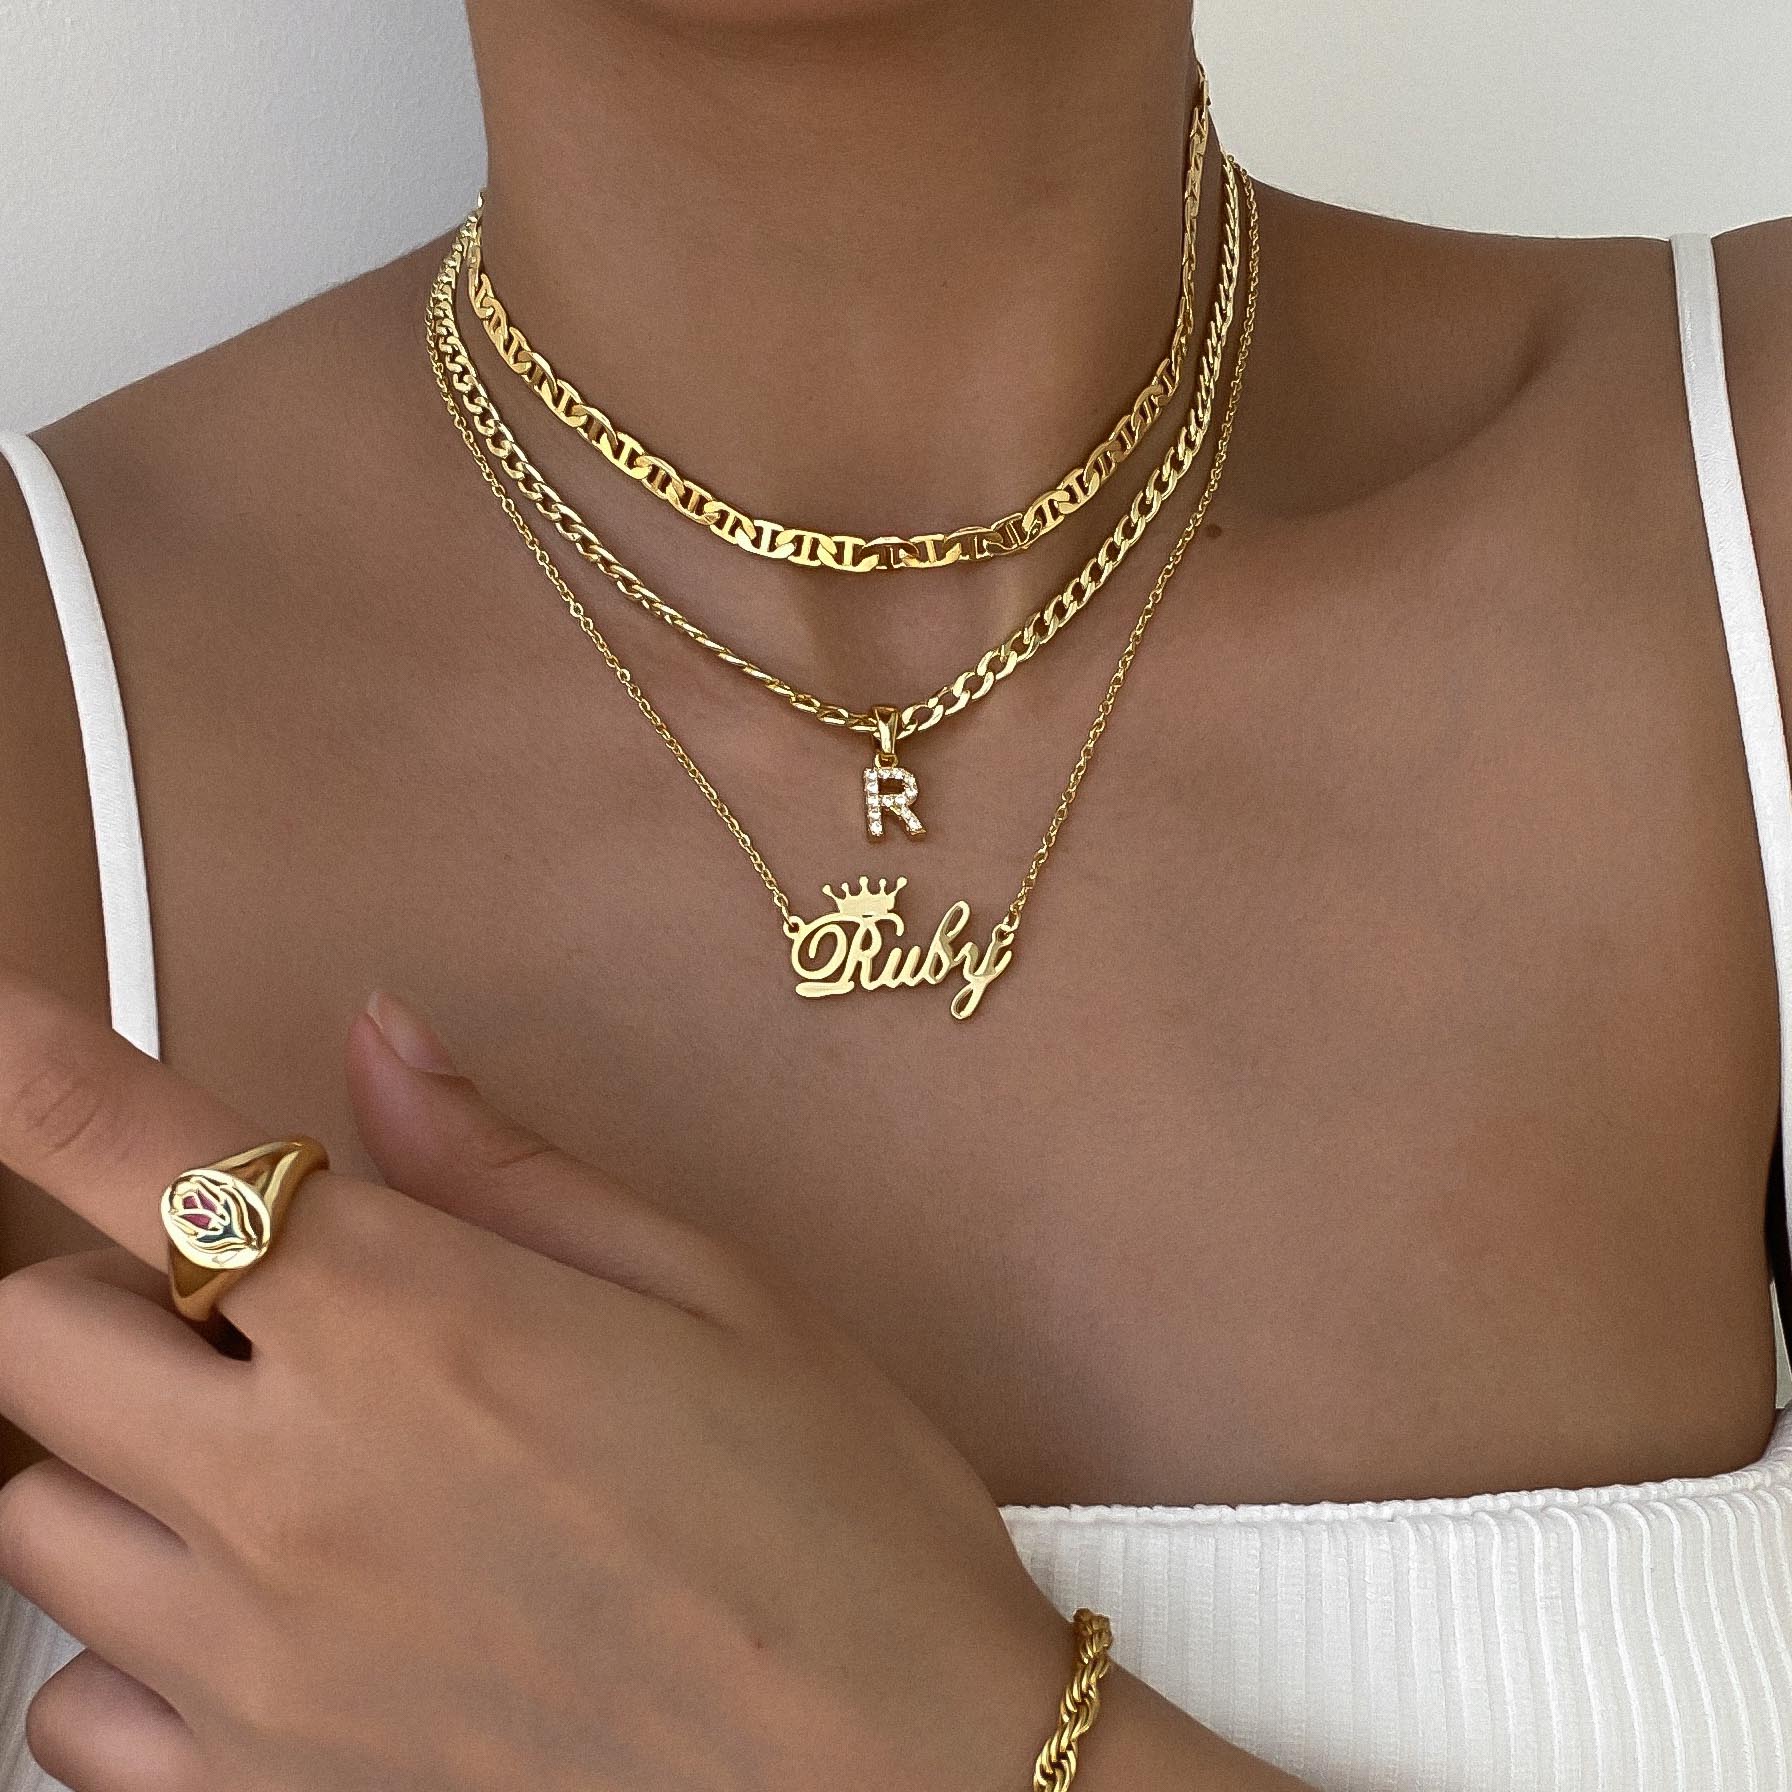 A woman wearing a gold customised necklace, initial necklace and gold chain, and a signet ring and bracelet chain.